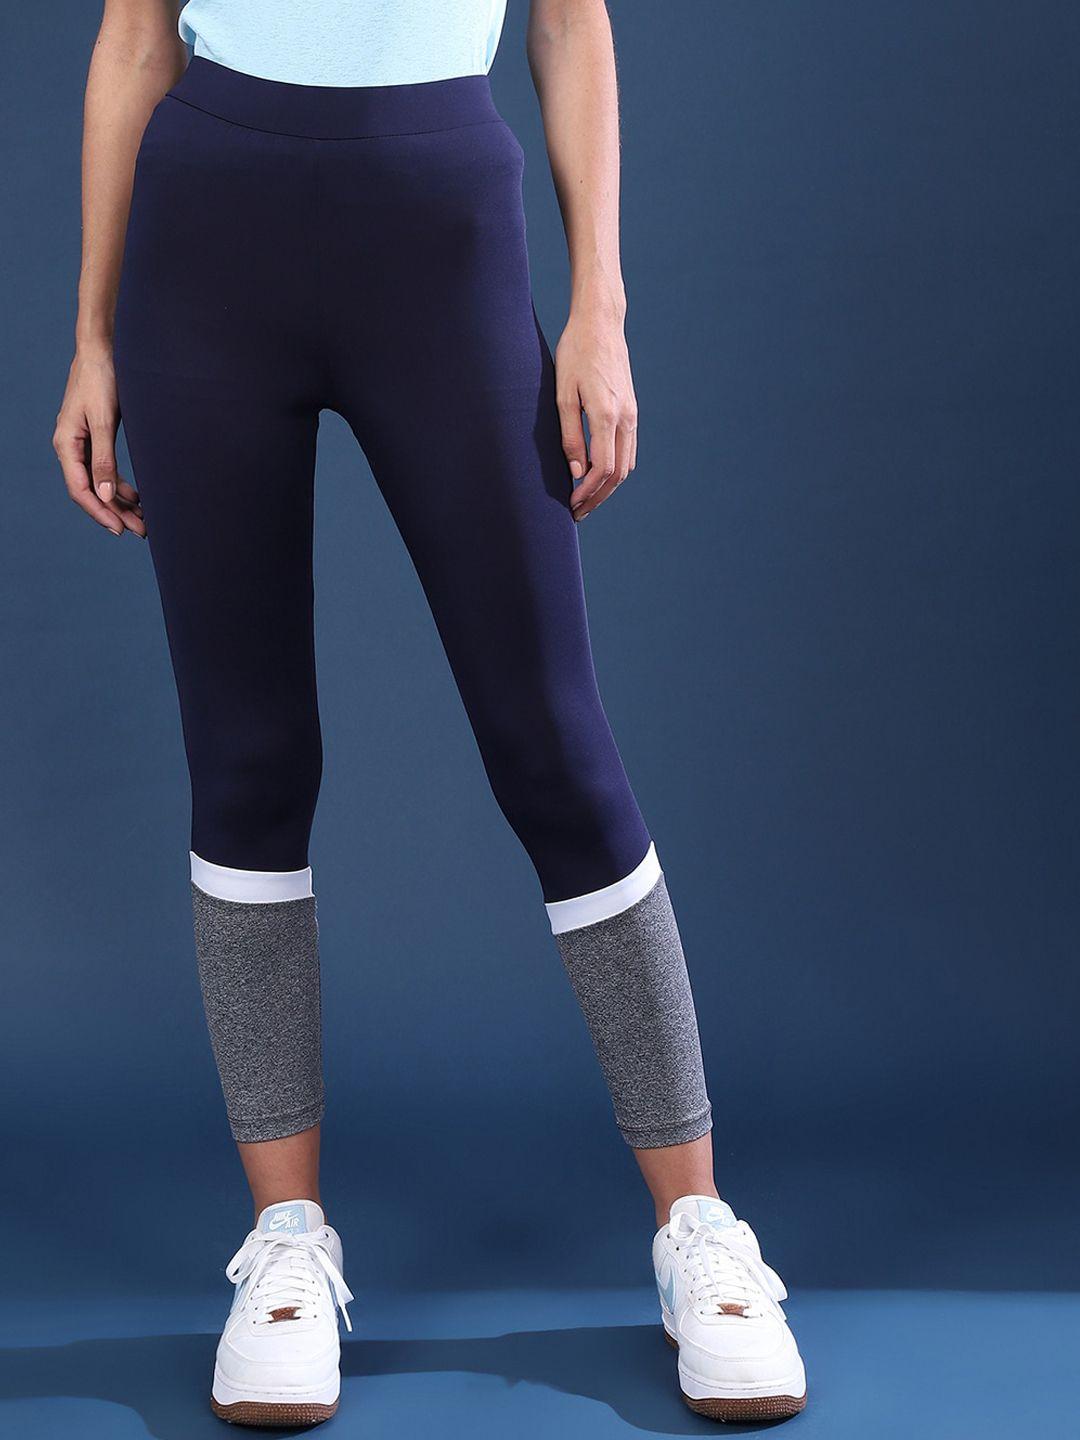 campus sutra women navy blue & grey colourblocked anti-odor dry-fit tights